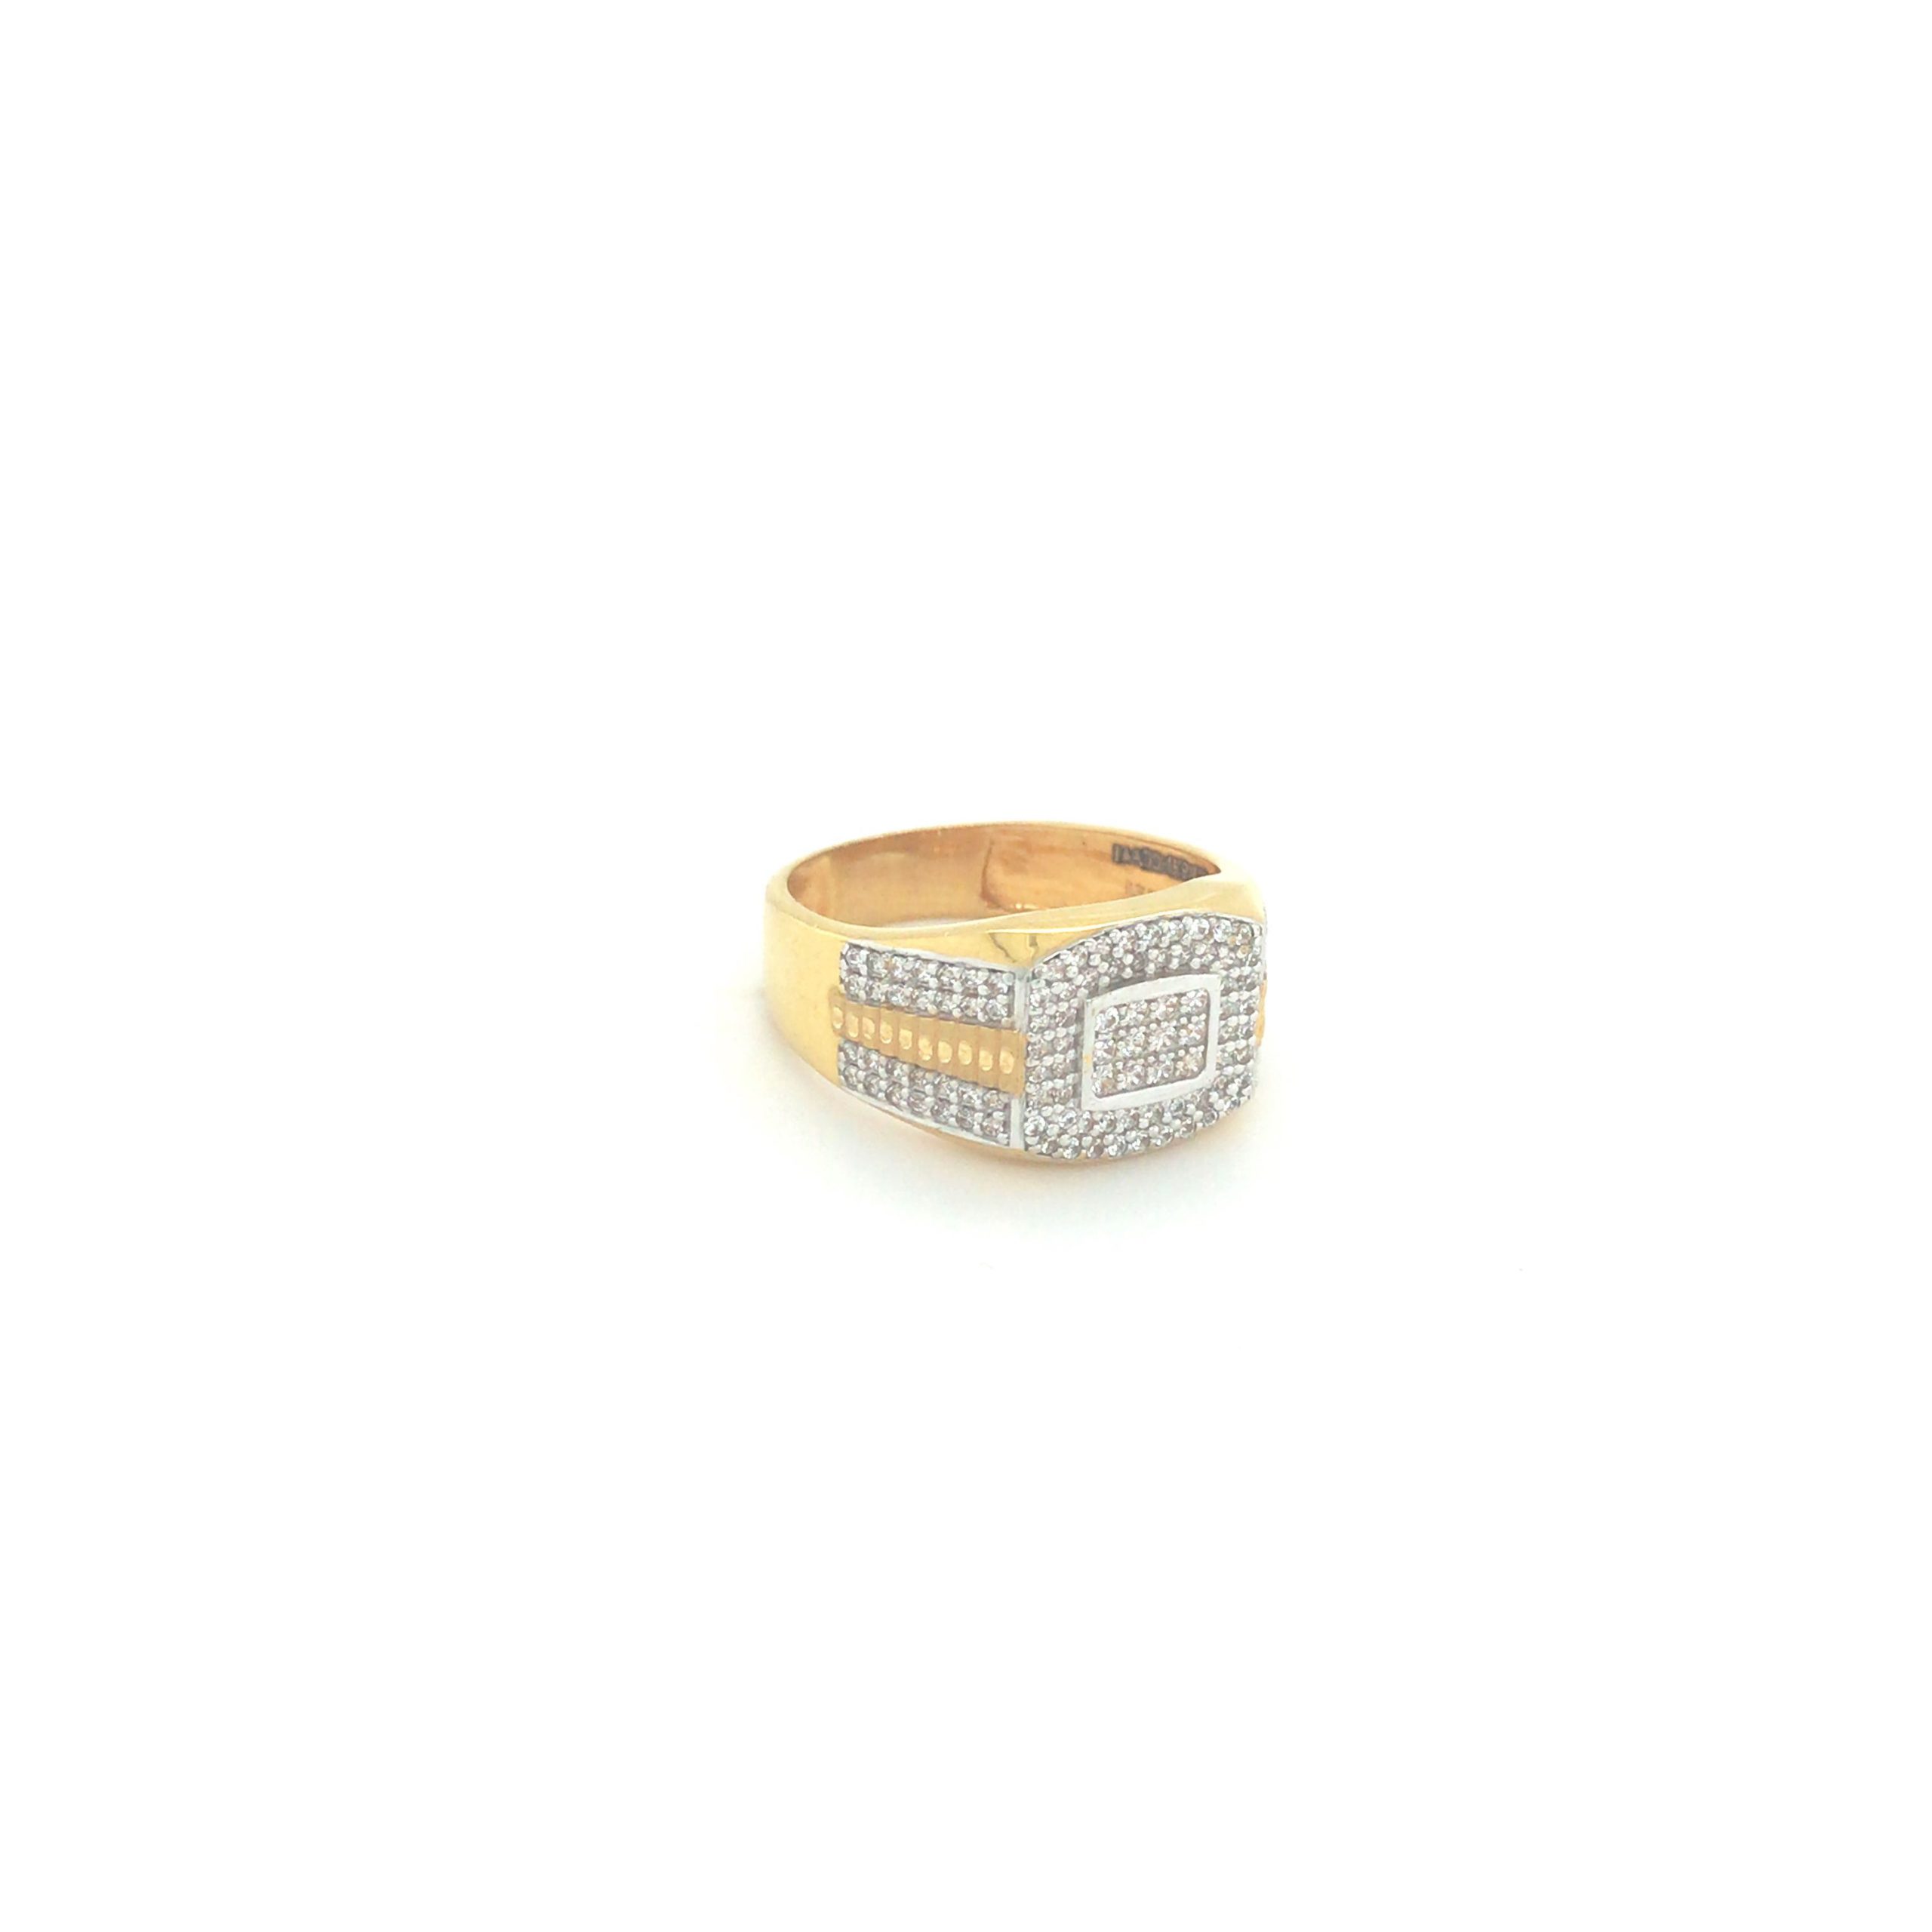 Wedding Rings | Gold Ring | Diamond Women Men Exquisite Ring Jewelry Gift  Rings For Friends Punk Rings (Gold, 5)|Amazon.com